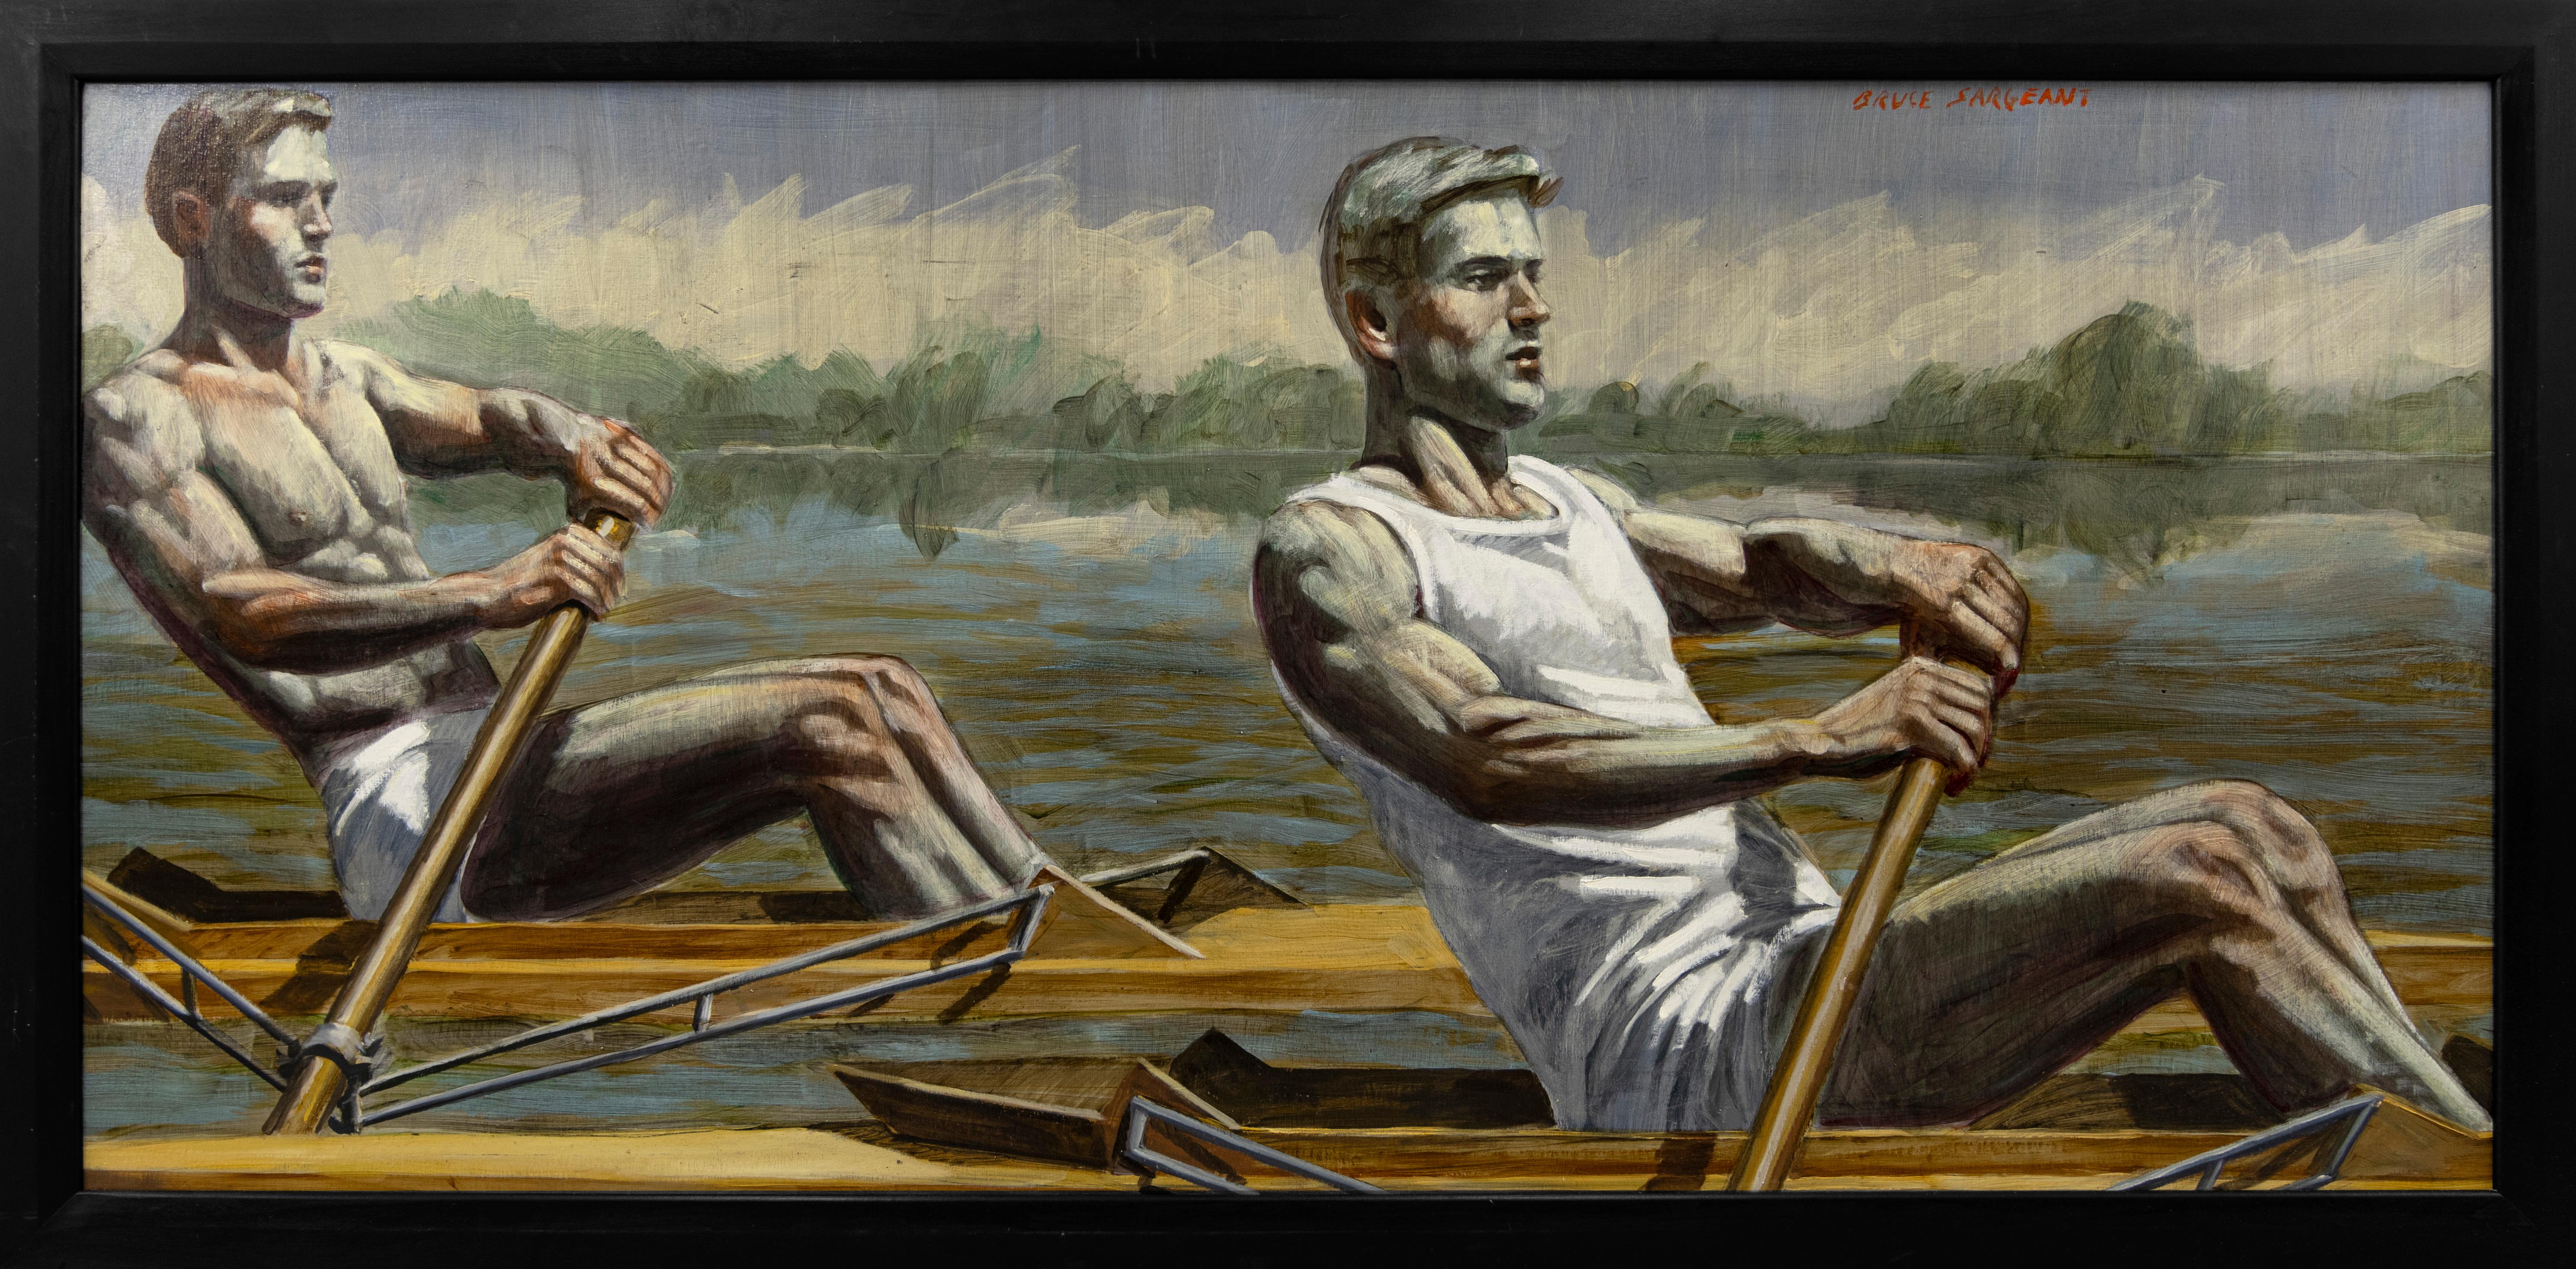 [Bruce Sargeant (1898-1938)] Two Rowers Gliding Across the Water